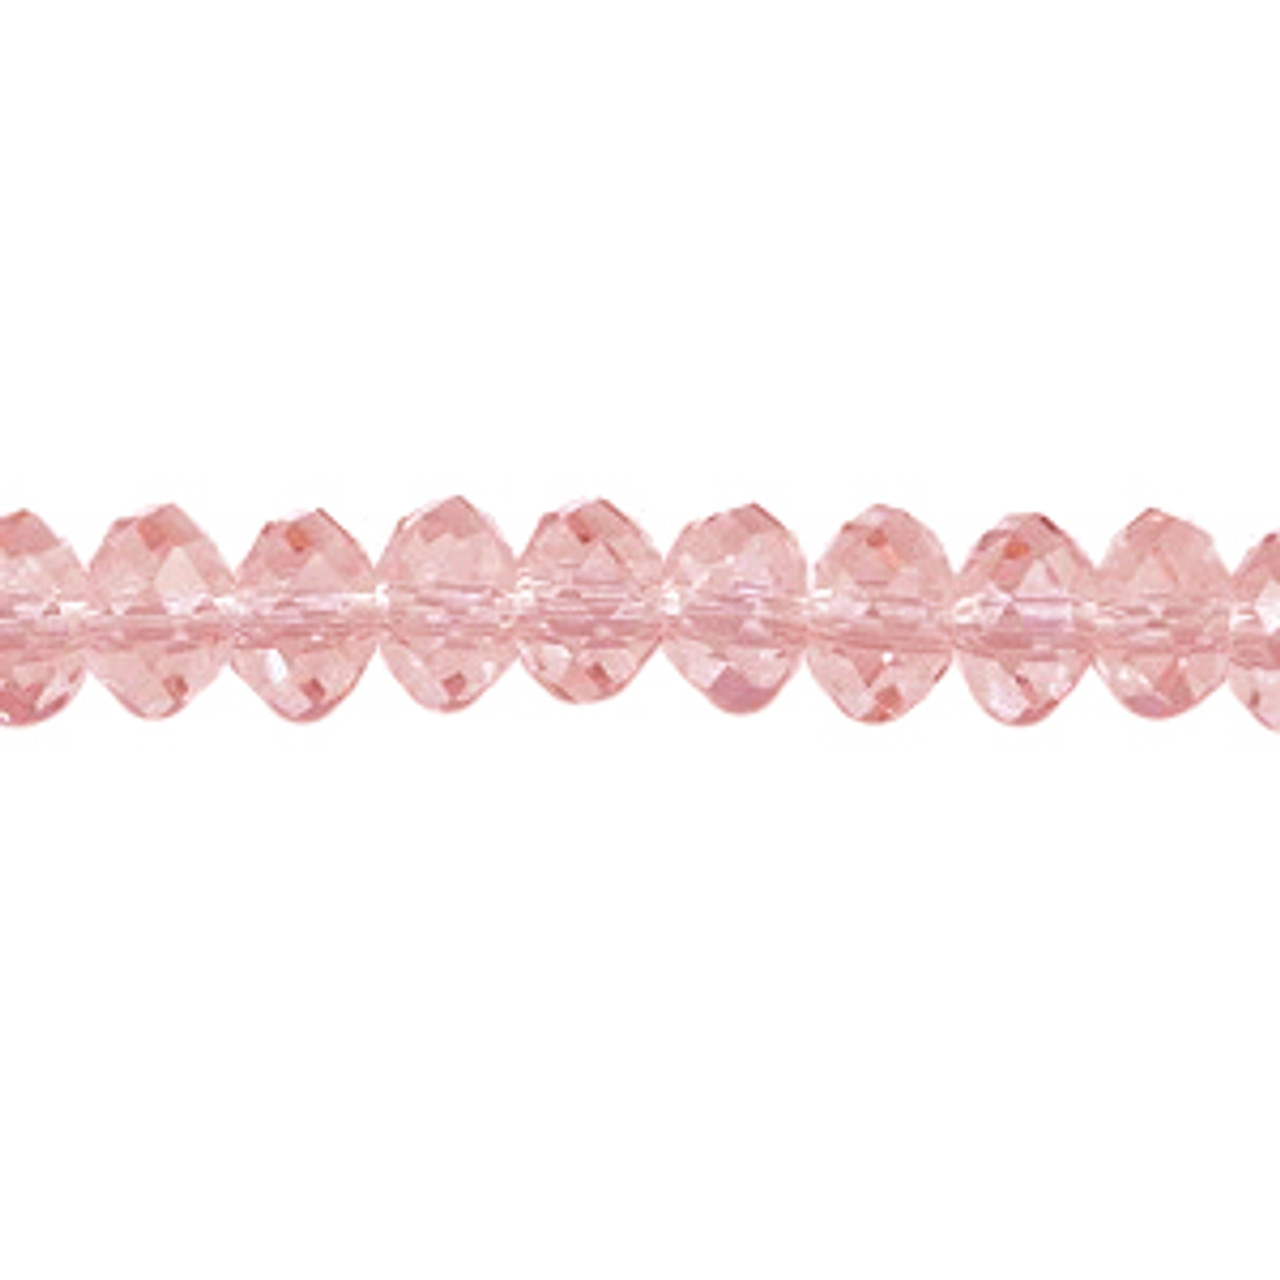 4x3mm Light Peach Faceted Roundel (115-118 Beads) #14